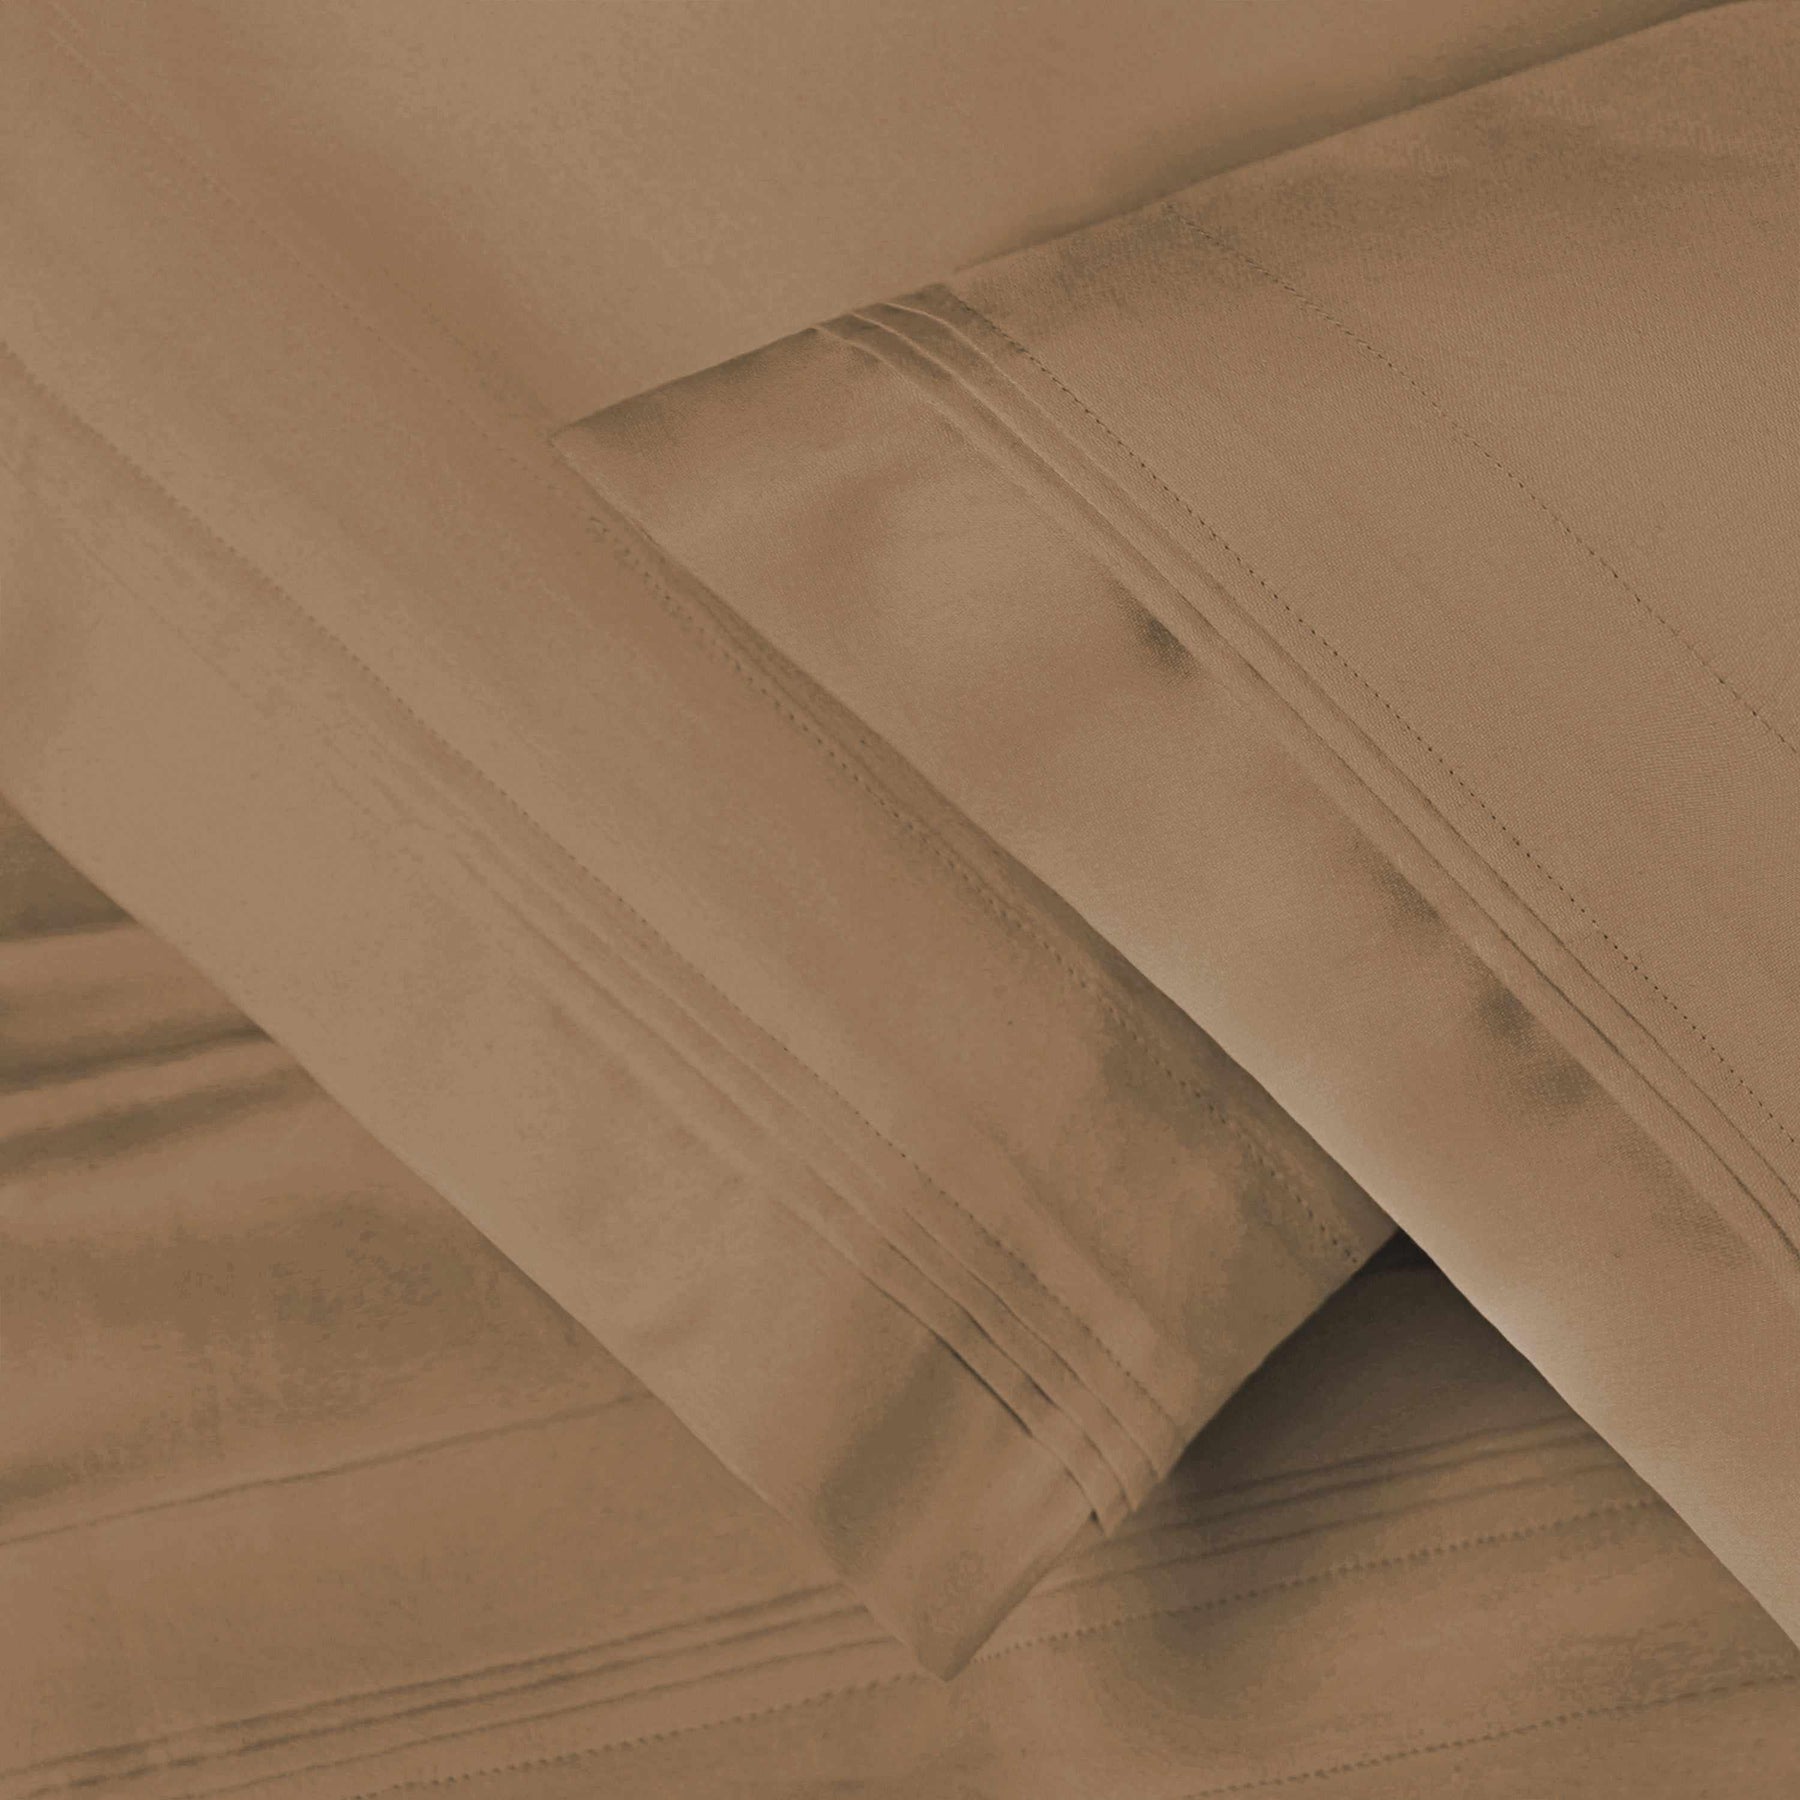 Solid 1500 Thread Count Egyptian Cotton 2-Piece Pillowcase Set - Taupe